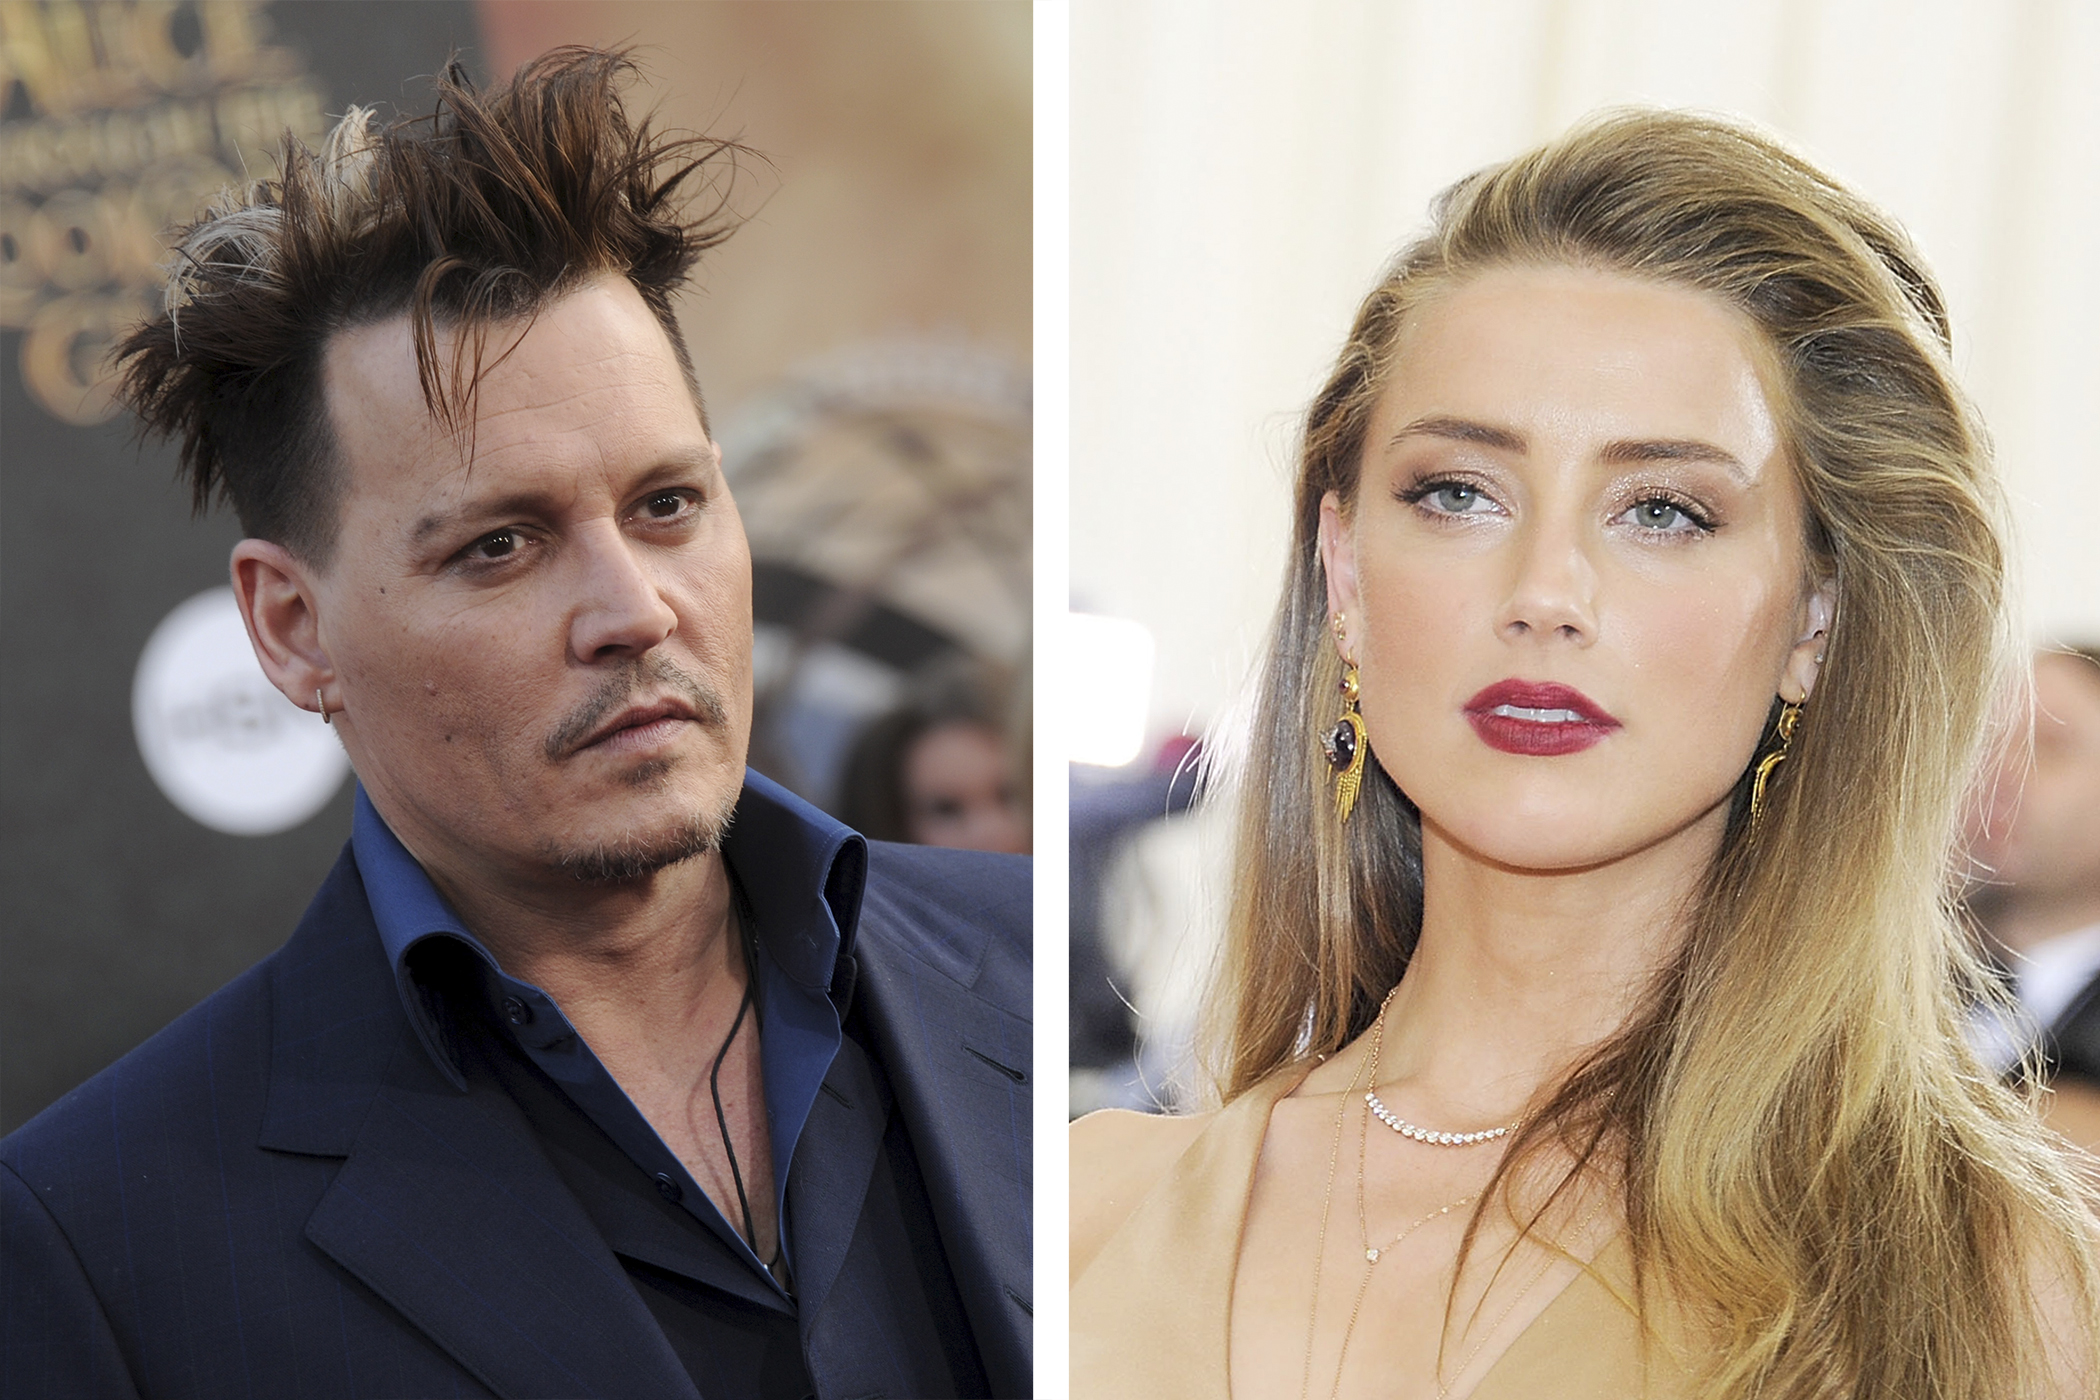 Johnny Depp, Amber Heard, and Your Divorce